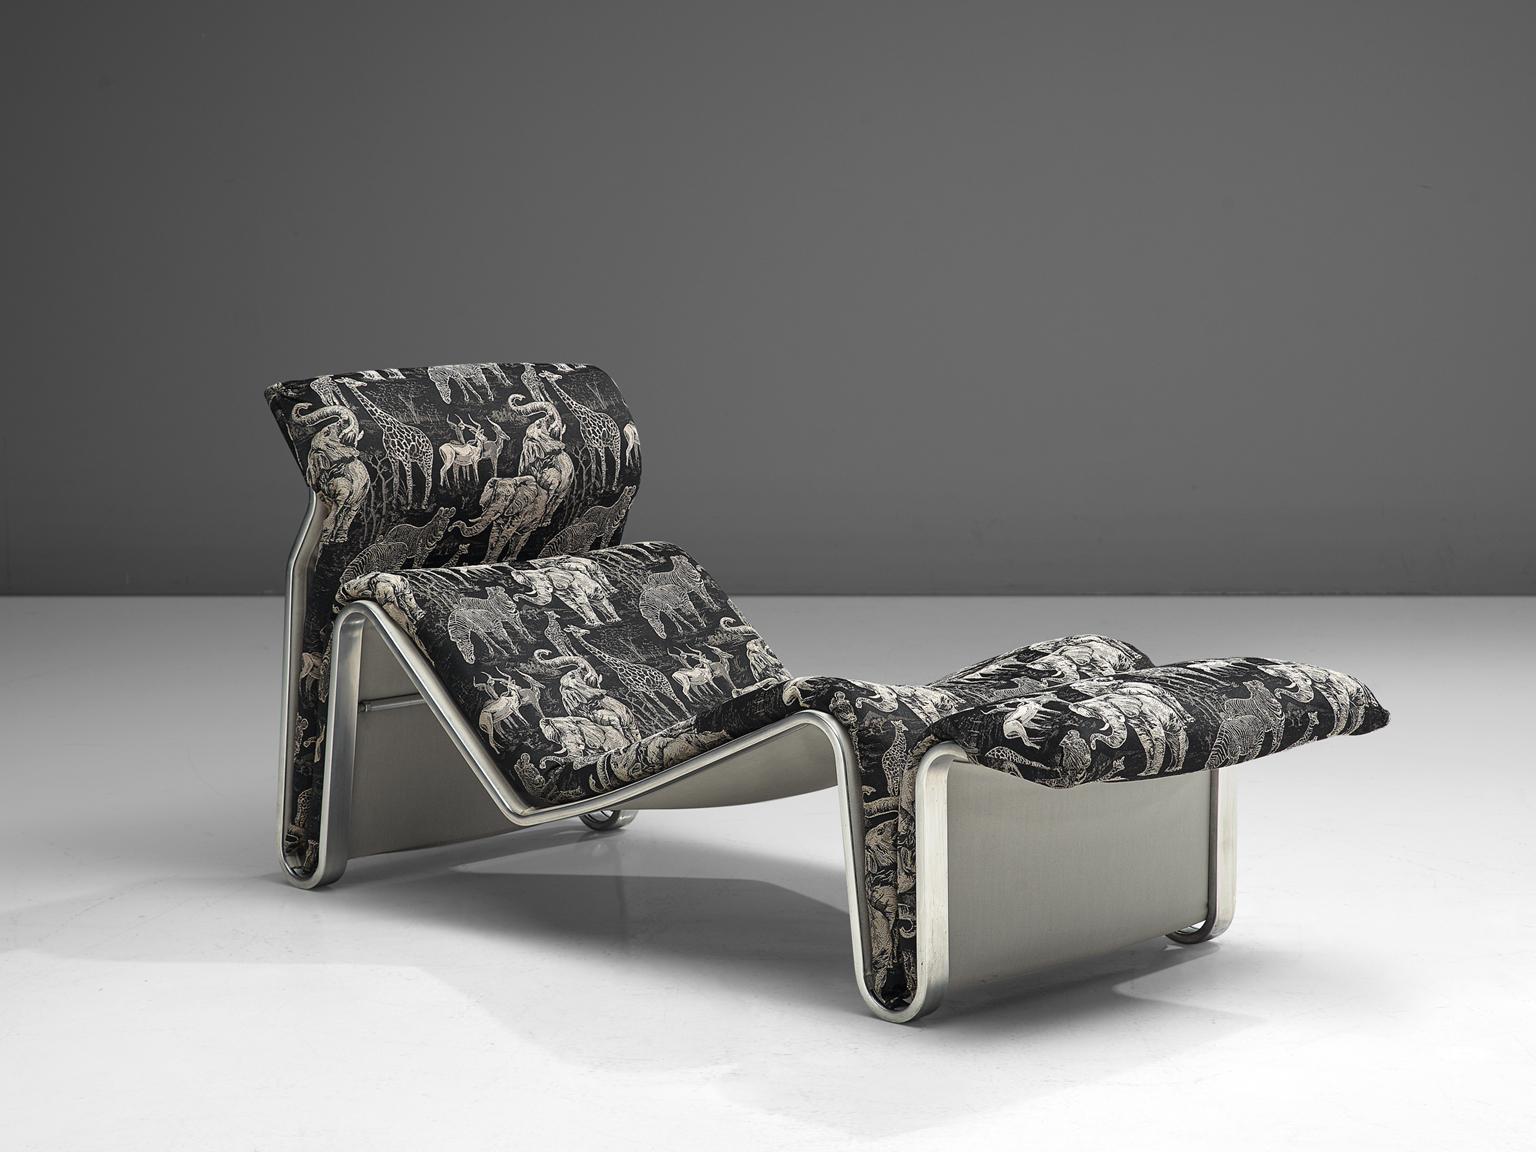 Lounge chair, aluminium and fabric, 1970s, Denmark.

Very strong designed chaise lounge. The bend aluminium is finished with a very rare but extraordinary fabric. The shape of the daybed is extremely well made for the body to relax. Decorated with